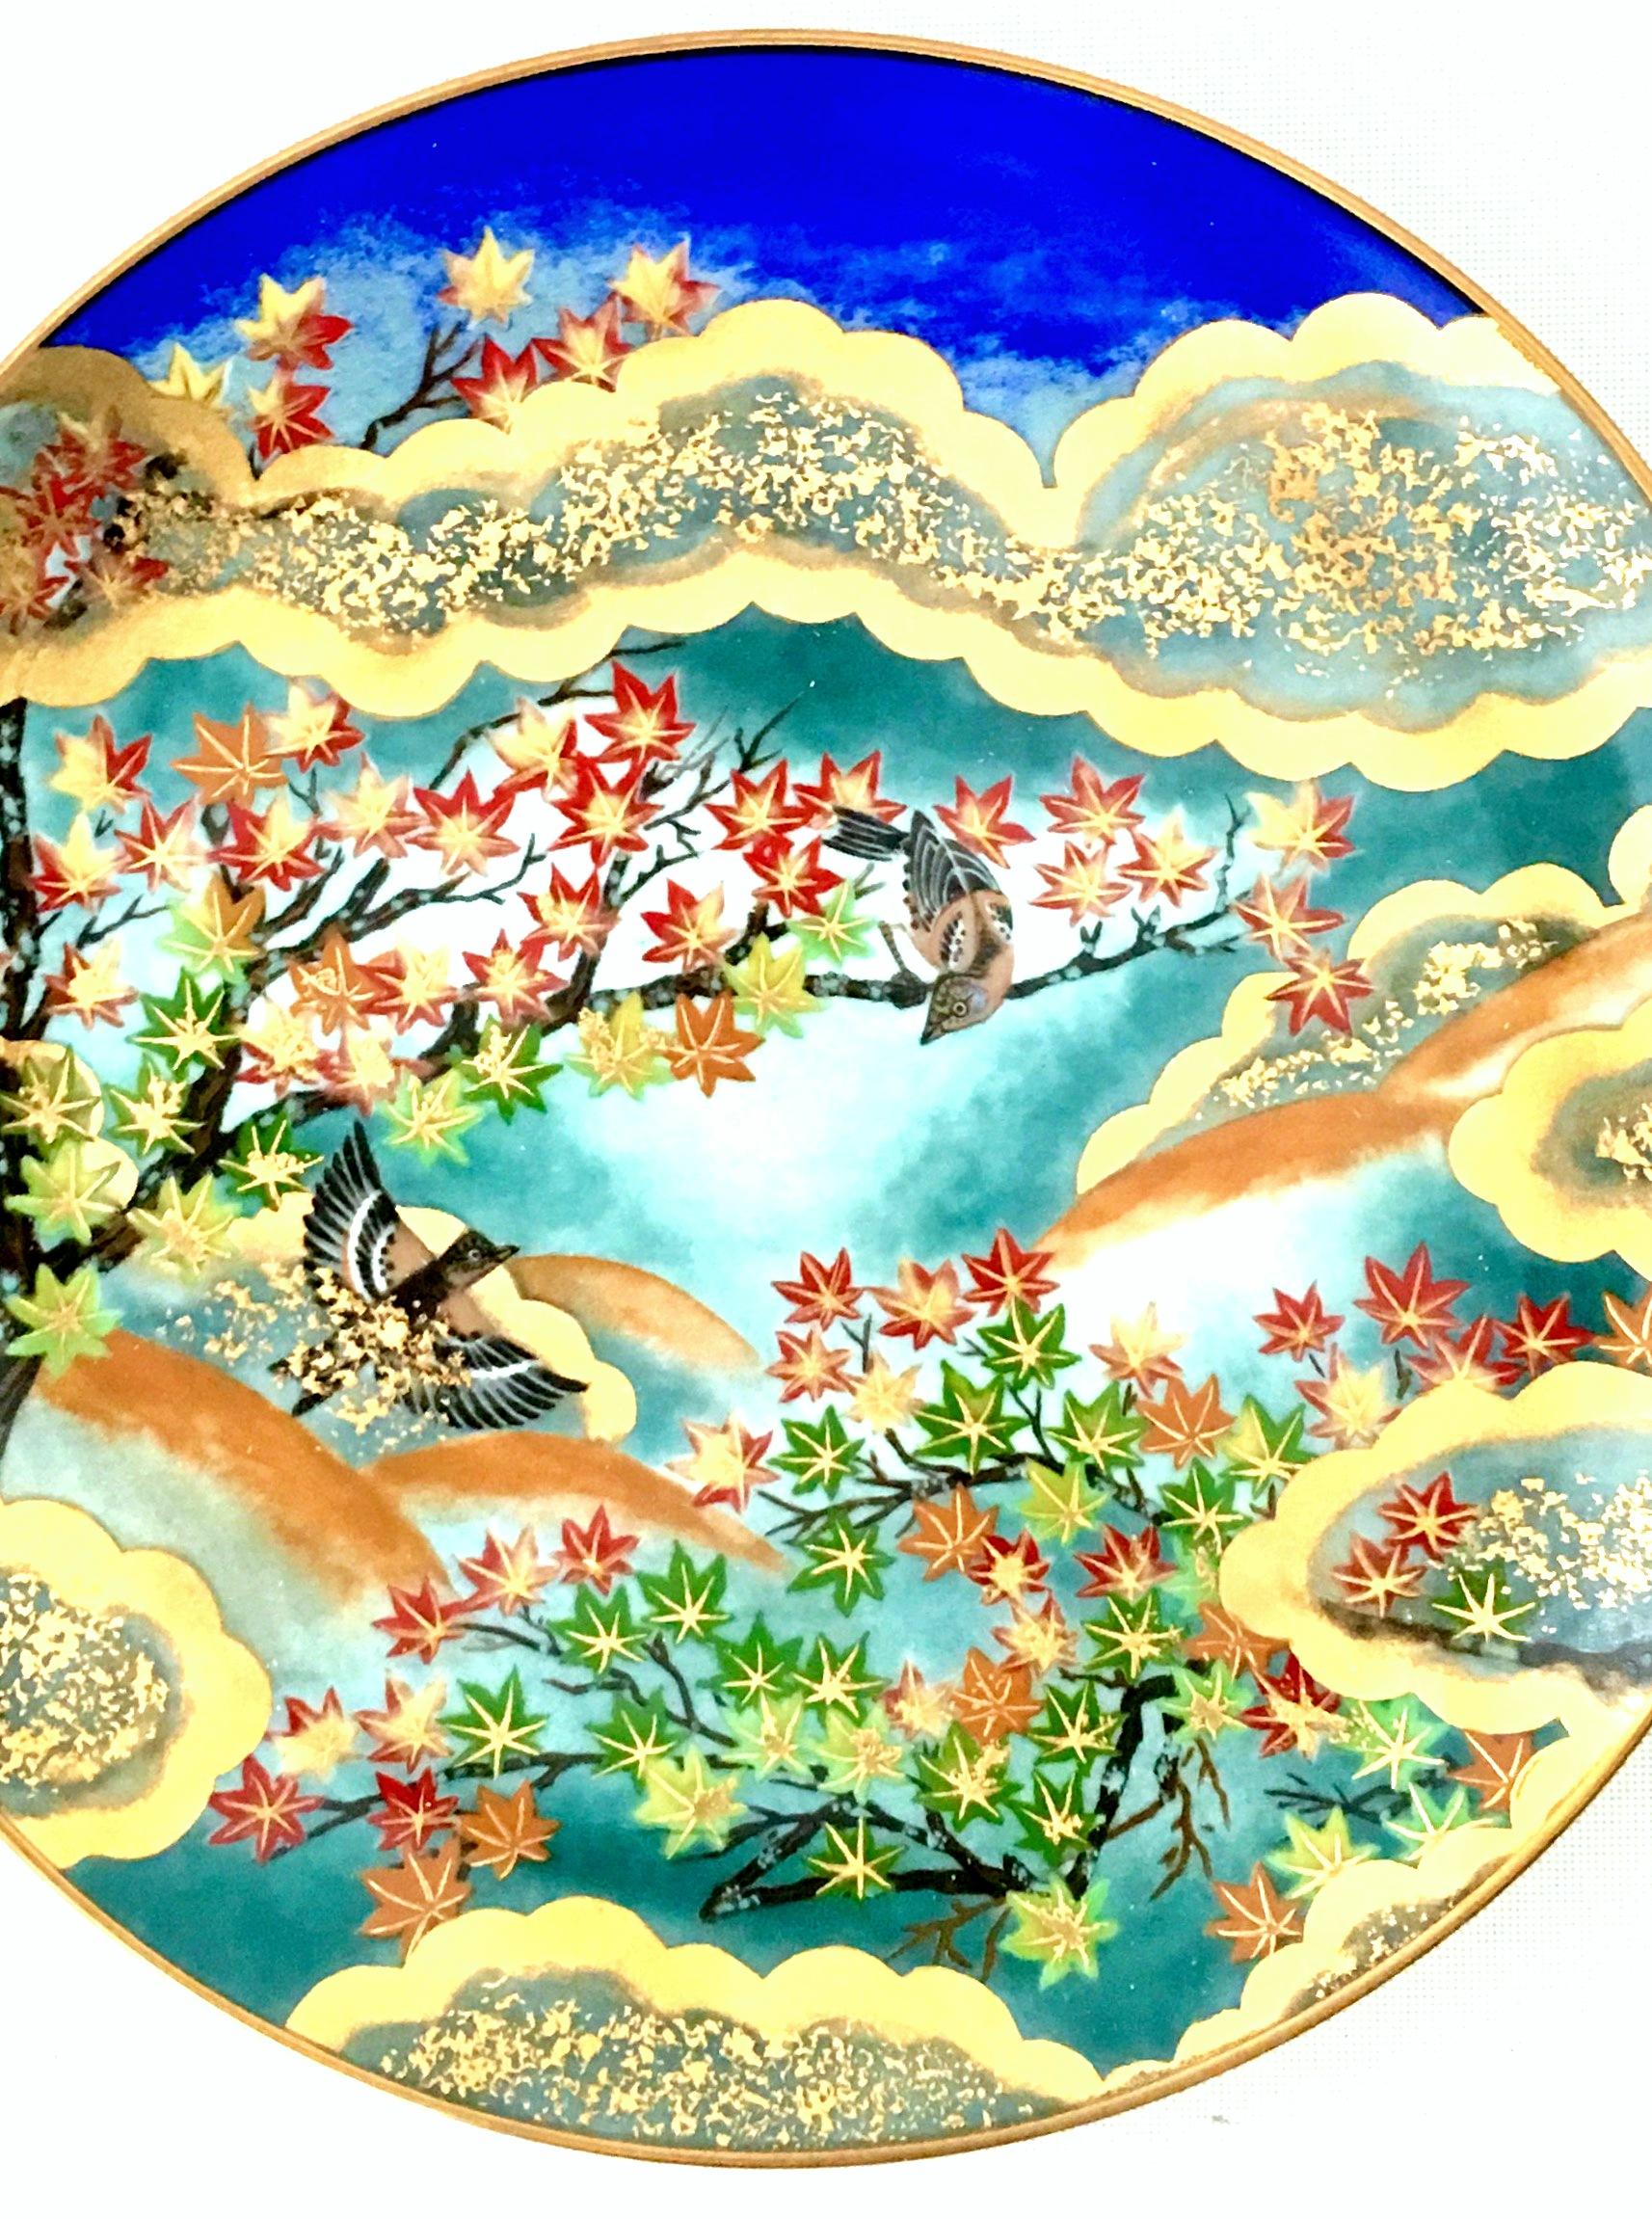 1986 Japanese Limited Edition Hand-Painted Porcelain Plates Set Of 4 For Sale 1